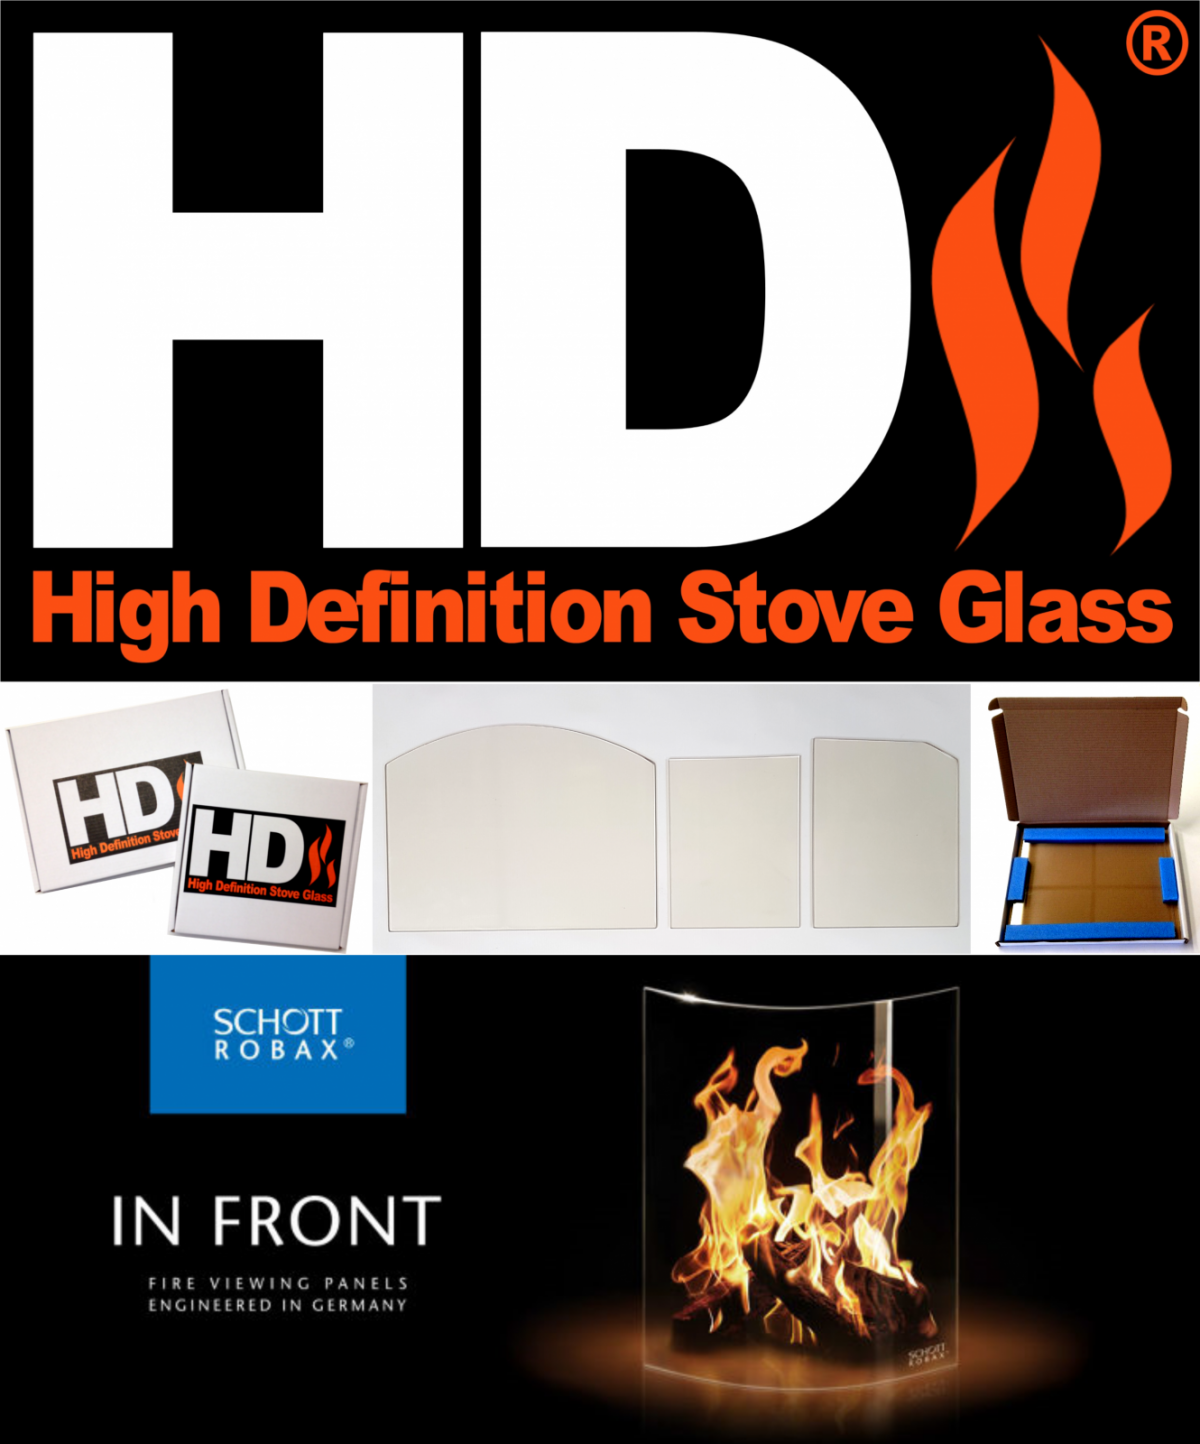 High Definition Stove Glass for the Aarrow Sherbourne Compact